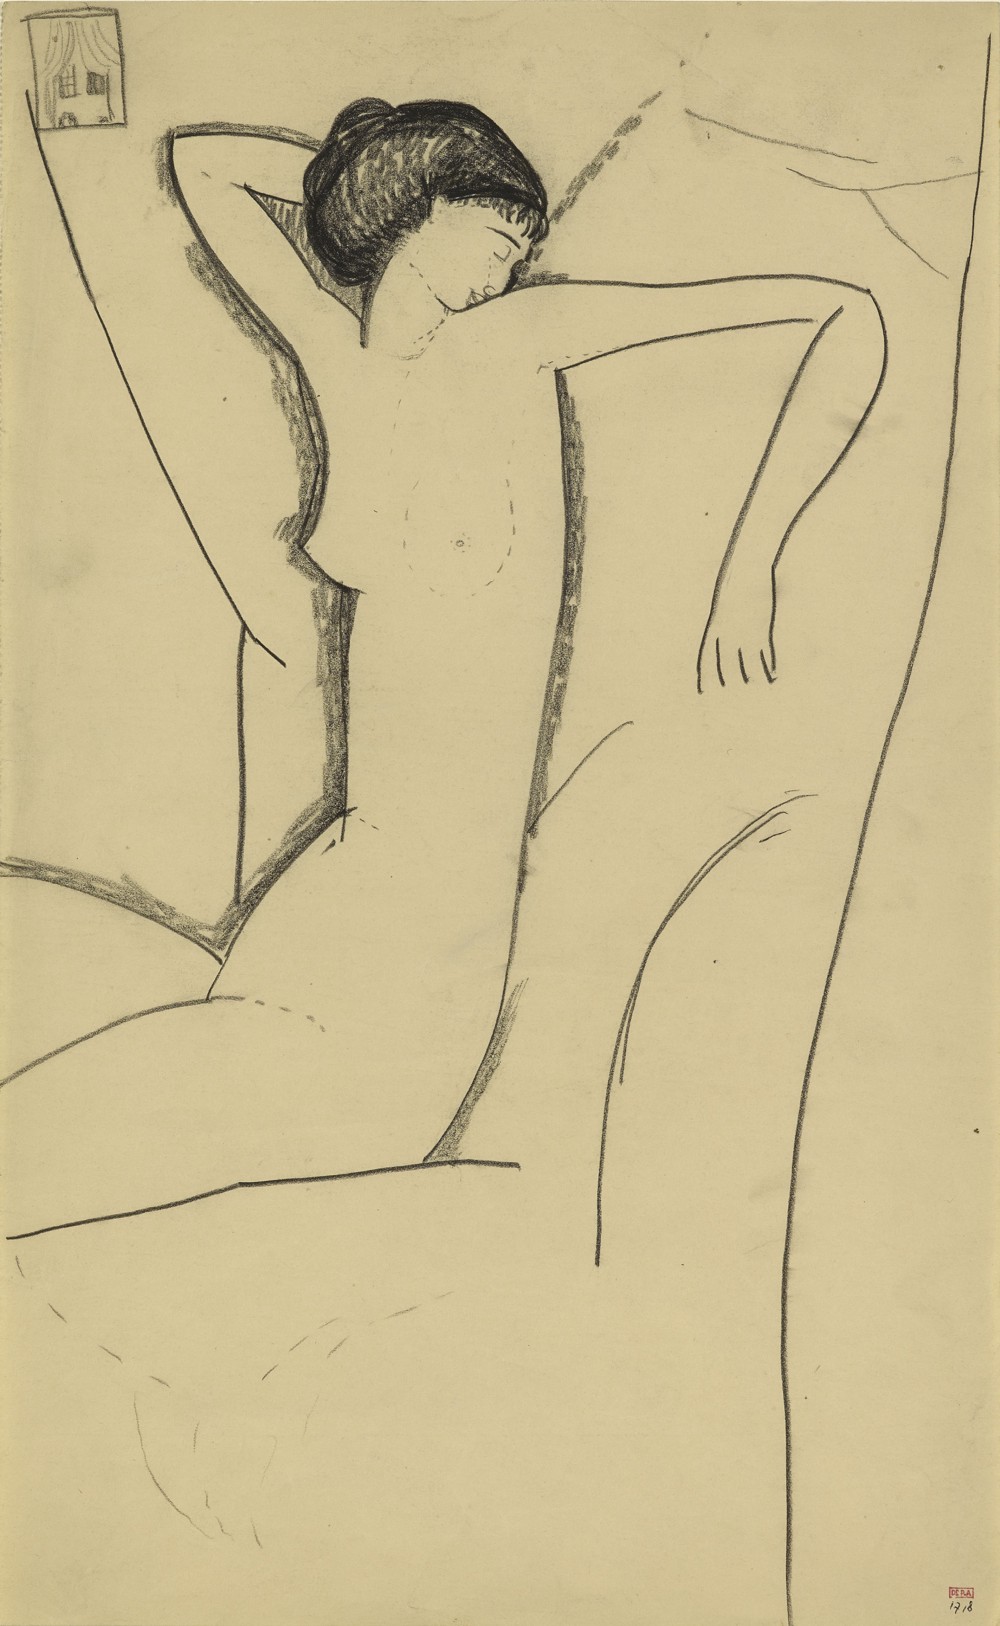 Femme Nue Assise by Amedeo Modigliani - Vers 1911 - 40,6 x 25,4 cm collection privée